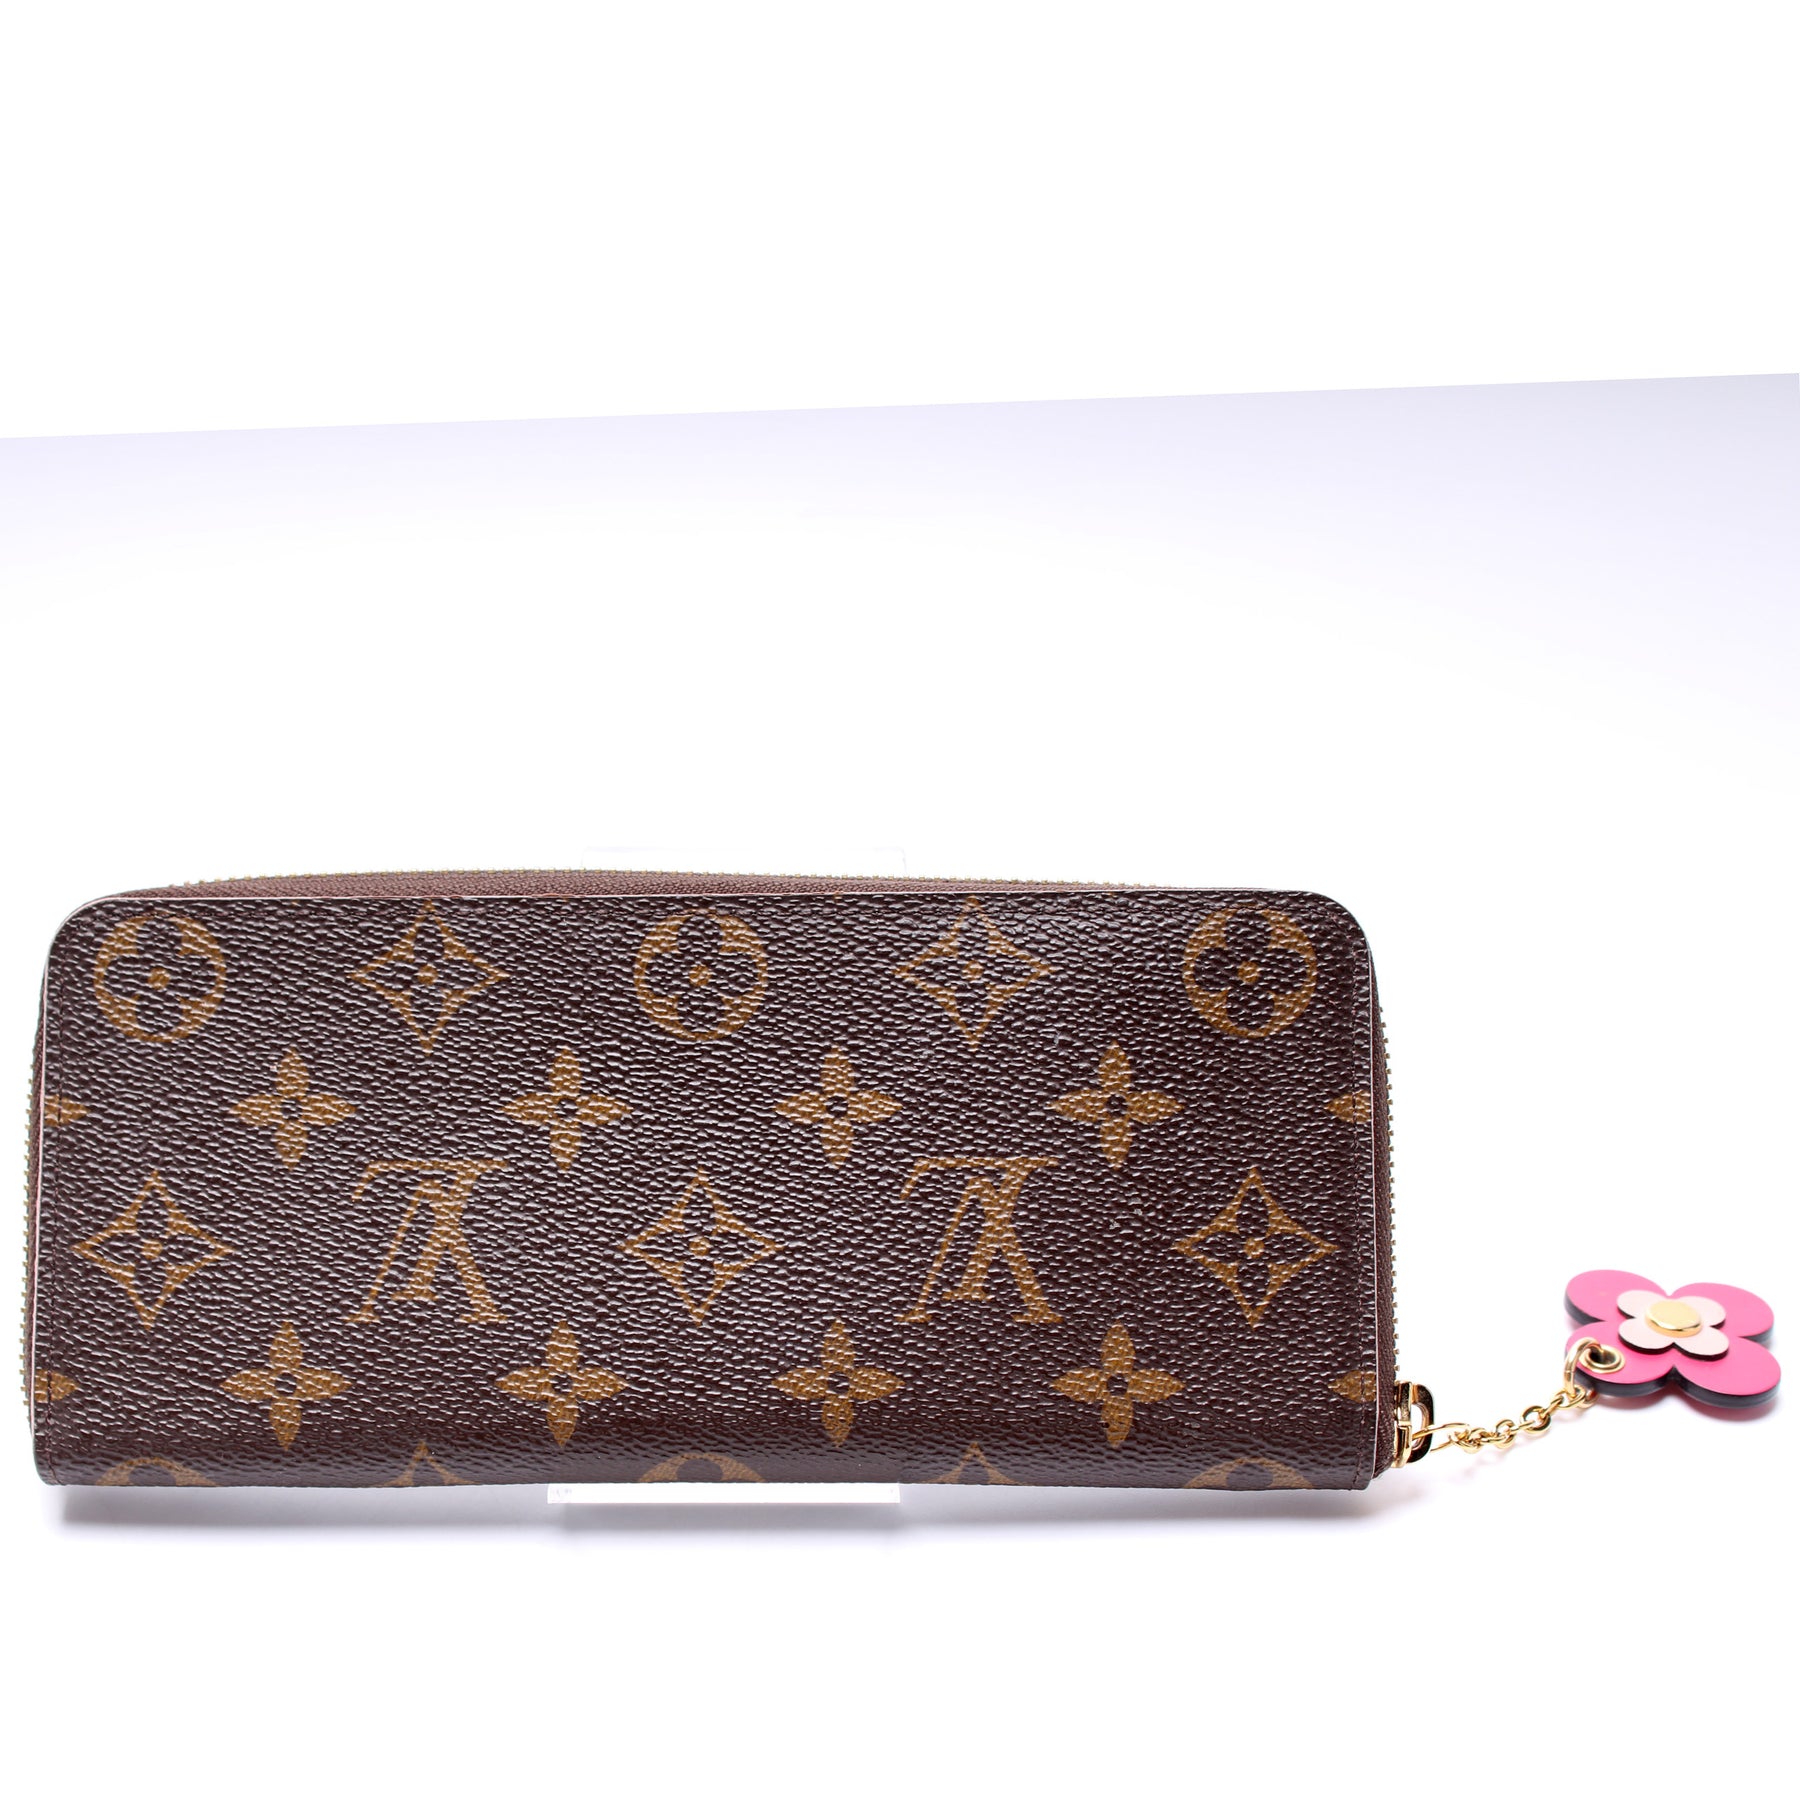 pink lv clemence wallet